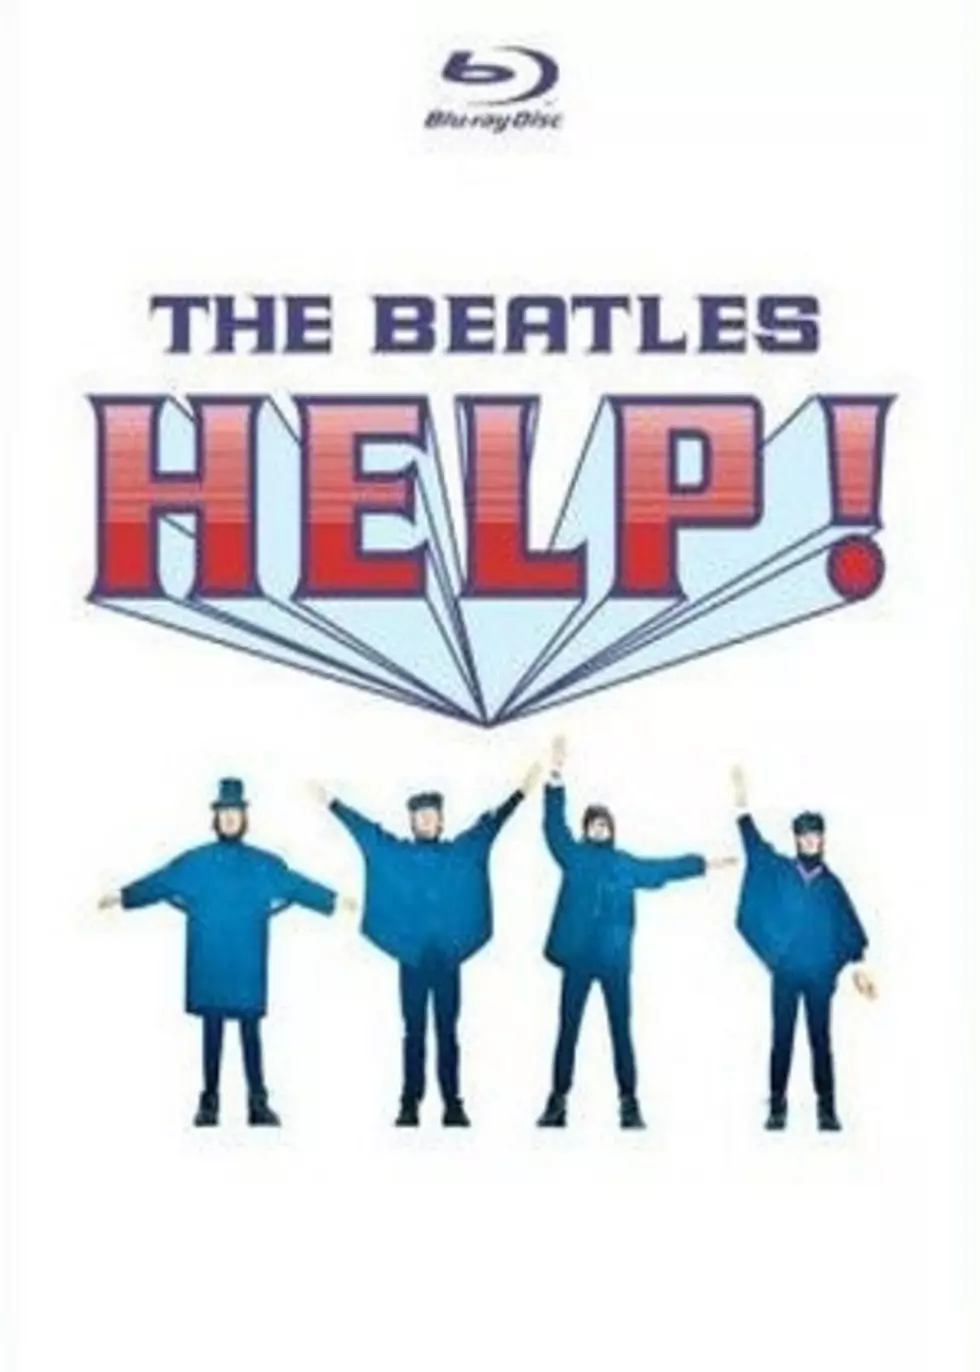 The Beatles&#8217; &#8216;Help!&#8217; Coming to Blu-ray